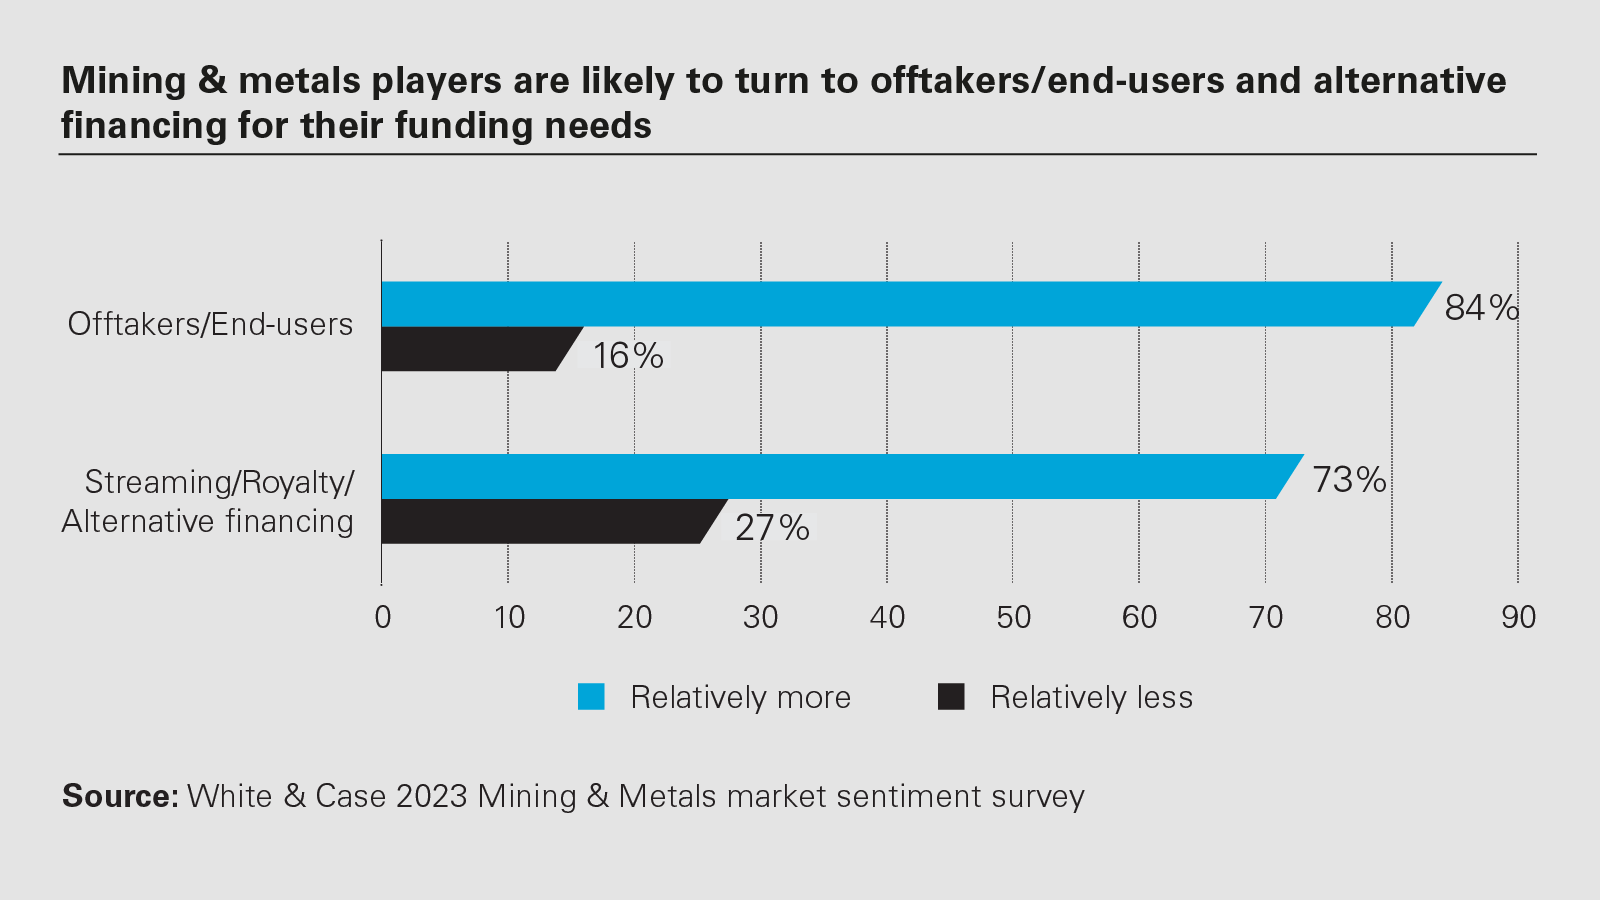 Mining & metals players are likely to turn to offtakers/ end-users and alternative financing for their funding needs